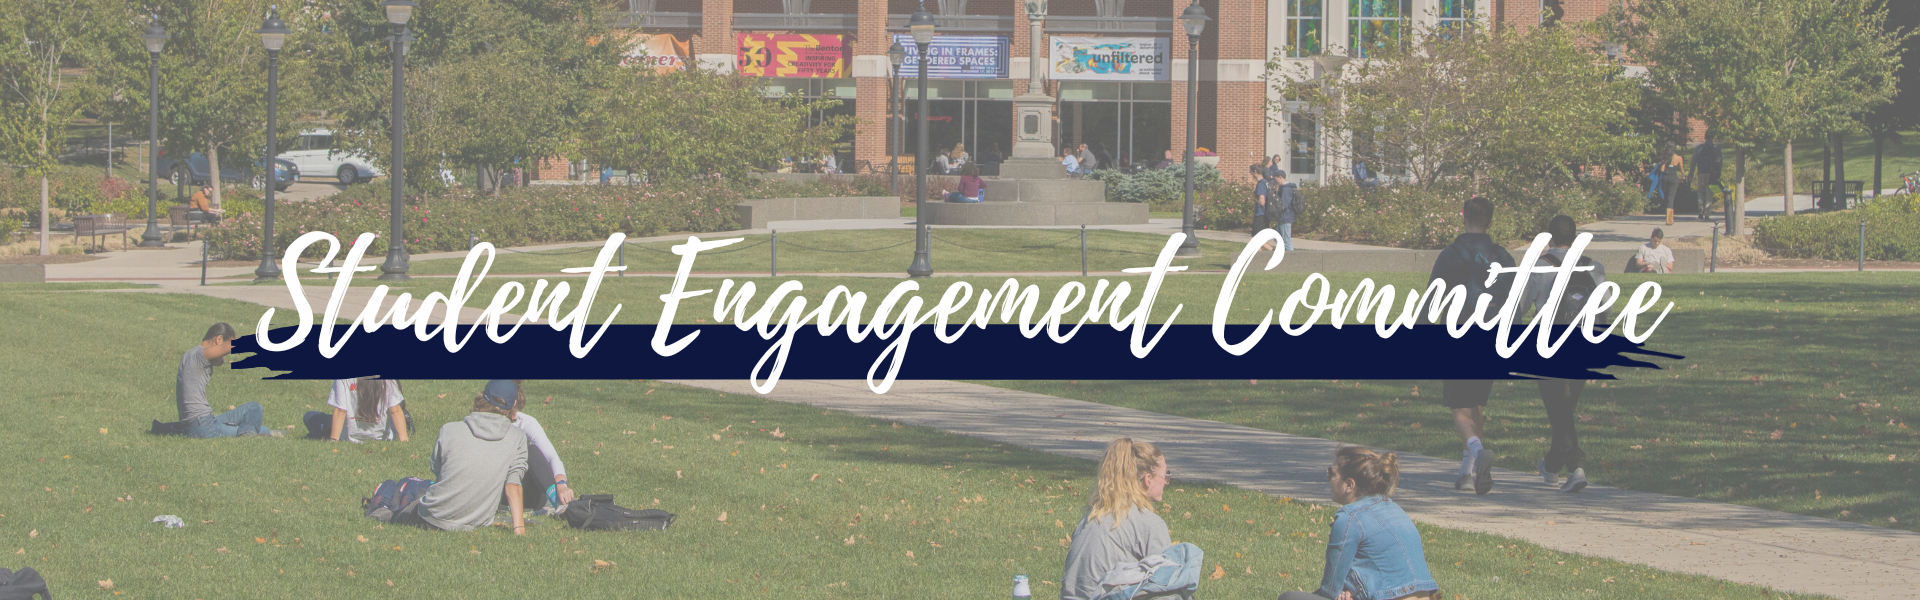 Student Engagement Committee banner